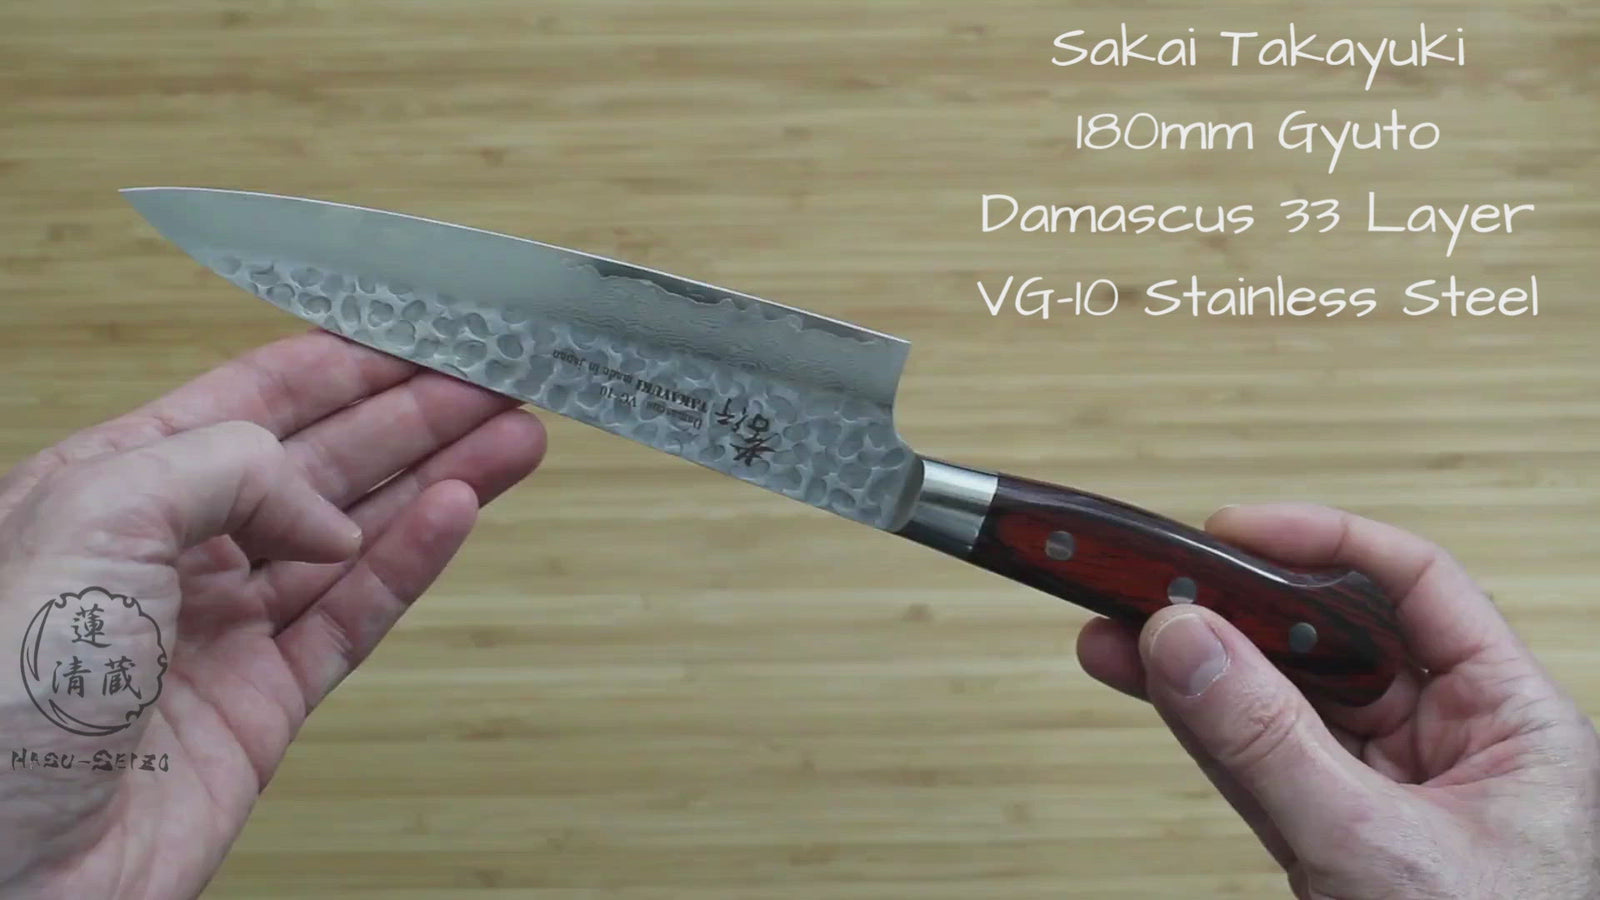 Gyuto Knives, Handcrafted Japanese Knives